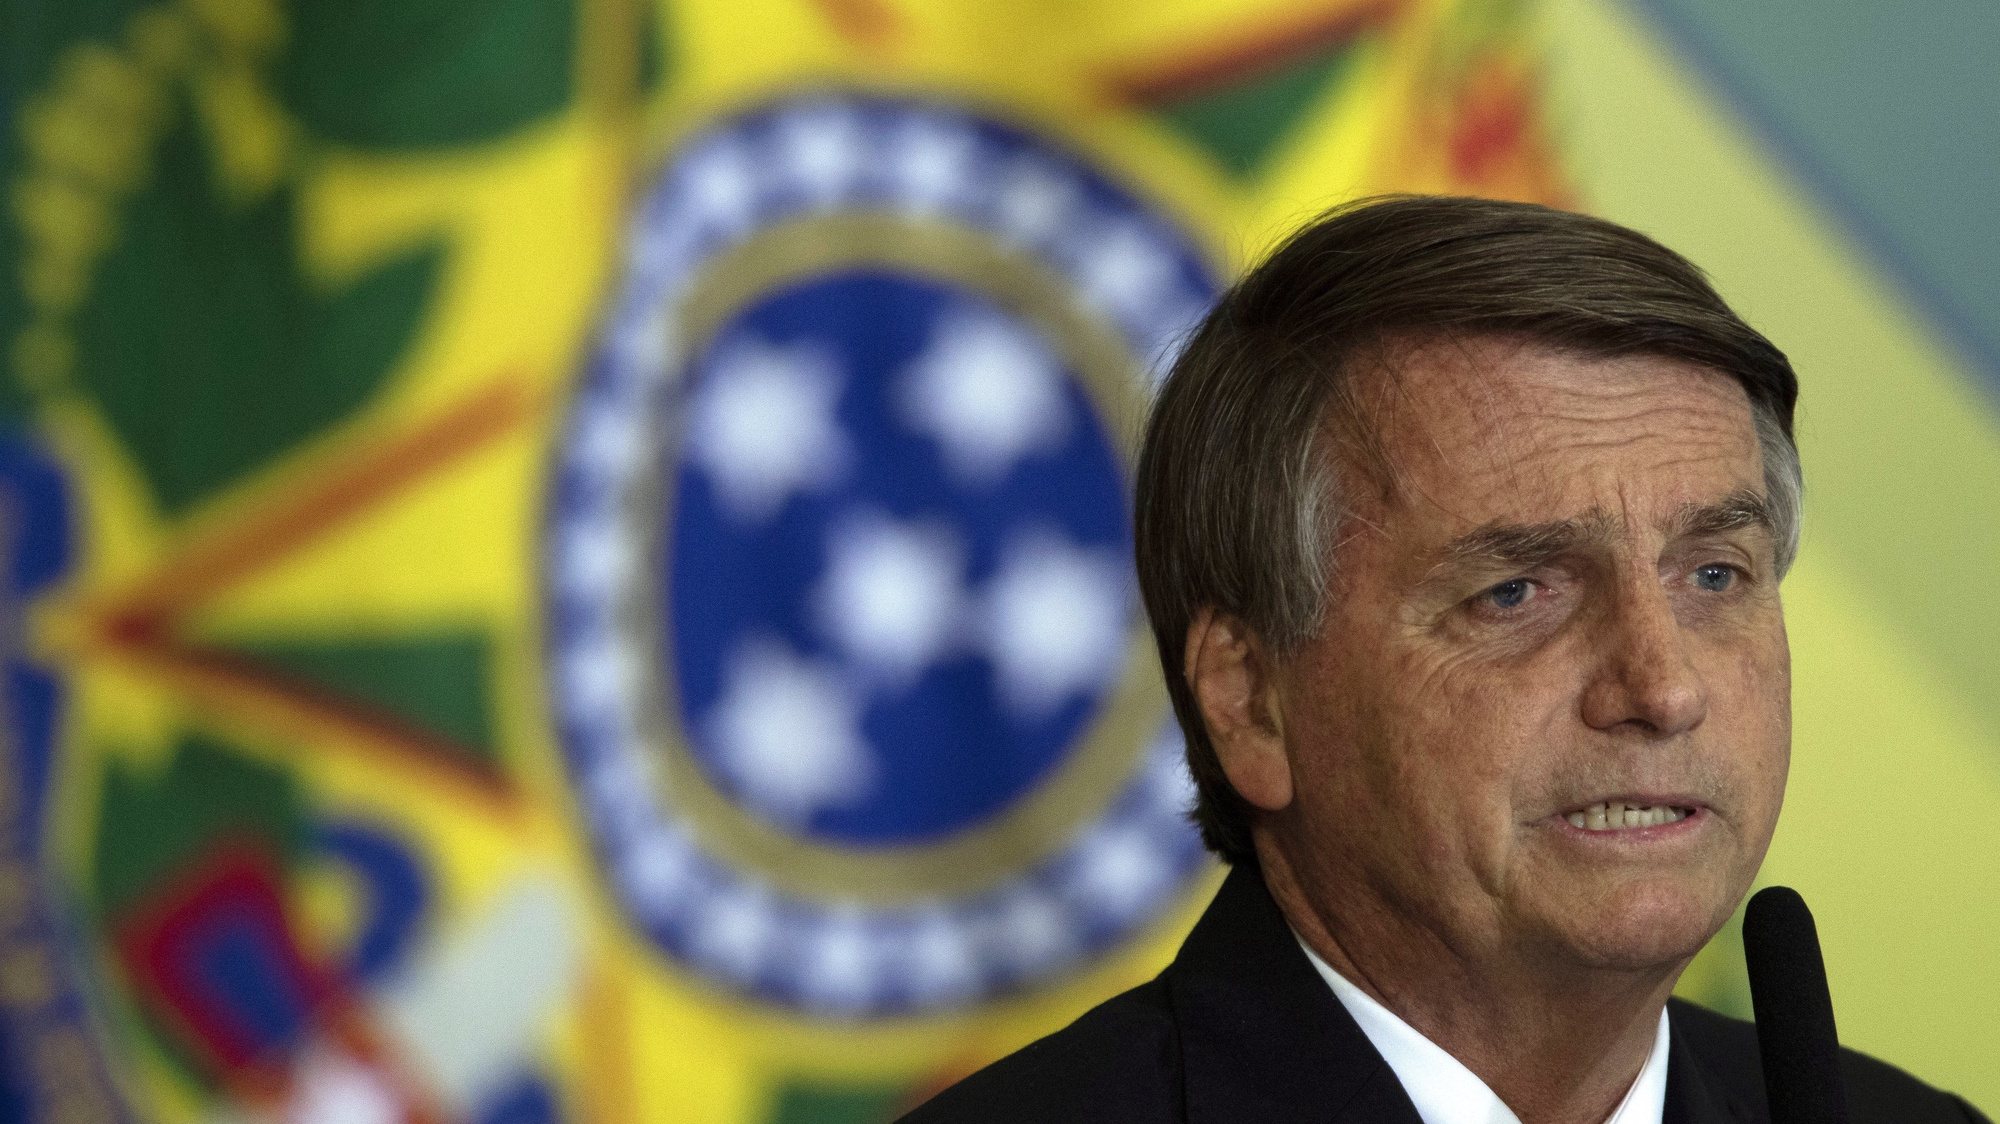 epa10024482 The President of Brazil Jair Bolsonaro, speaks, while participating in an act of National Policy for the Recovery of Learning in Basic Education, and the MECPlace, Innovation Ecosystem, and Digital Educational Solutions, at the Palacio do Planalto, in Brasilia, Brazil, 20 June 2022.  EPA/Joedson Alves